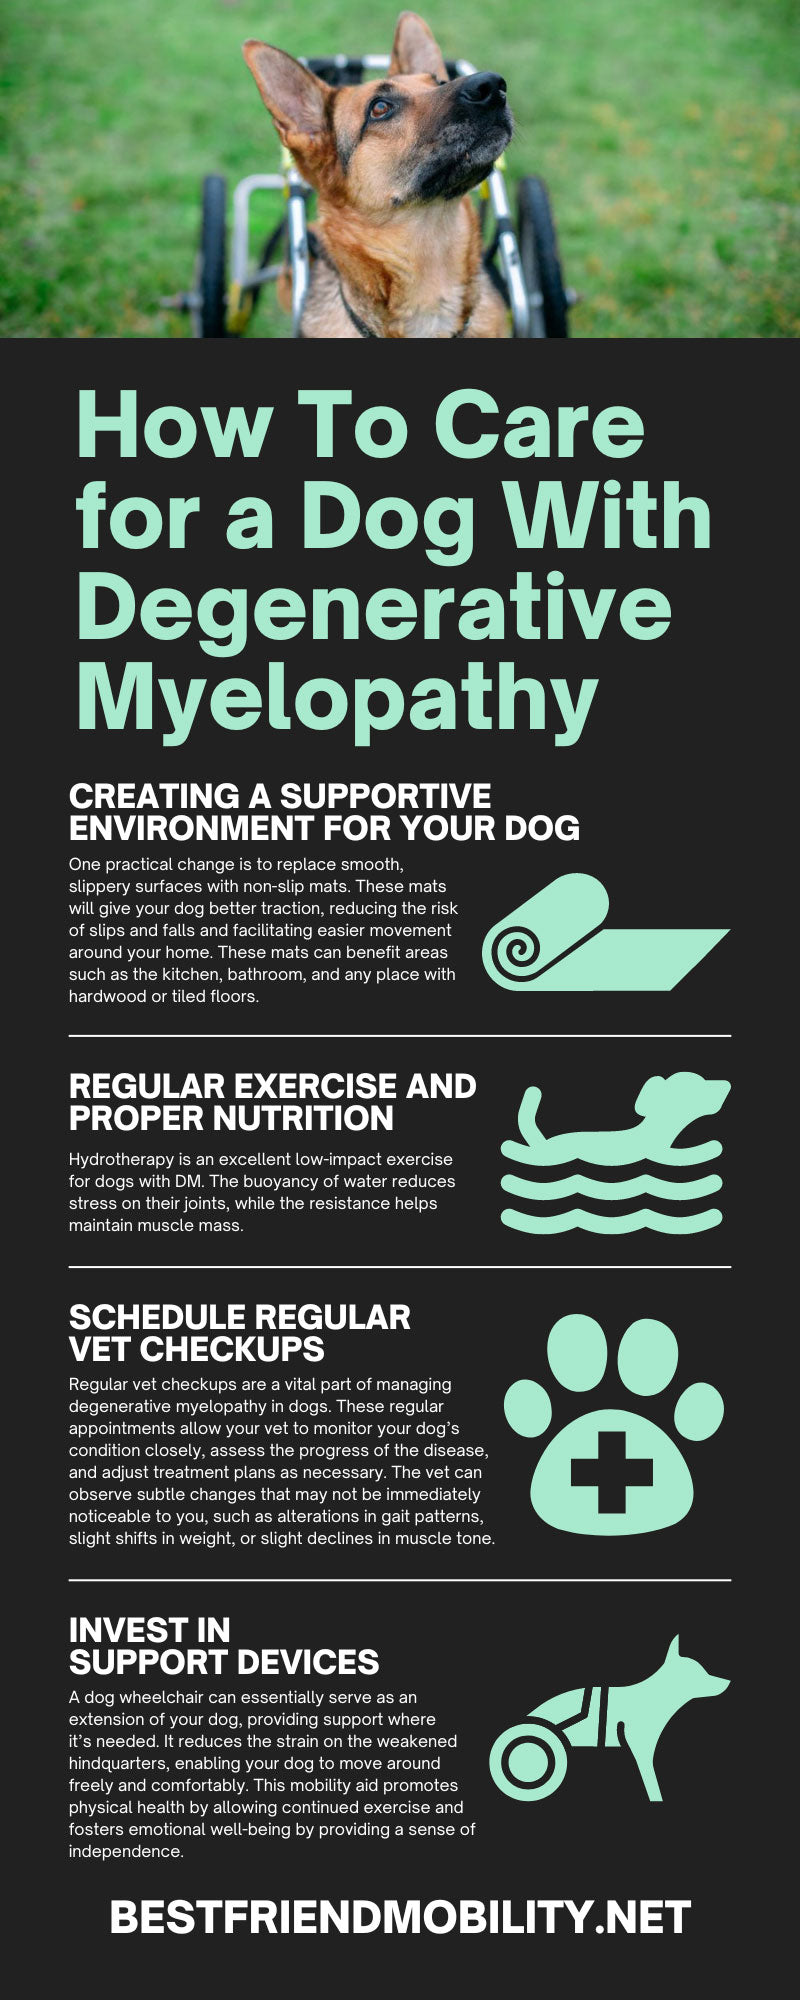 How To Care for a Dog With Degenerative Myelopathy